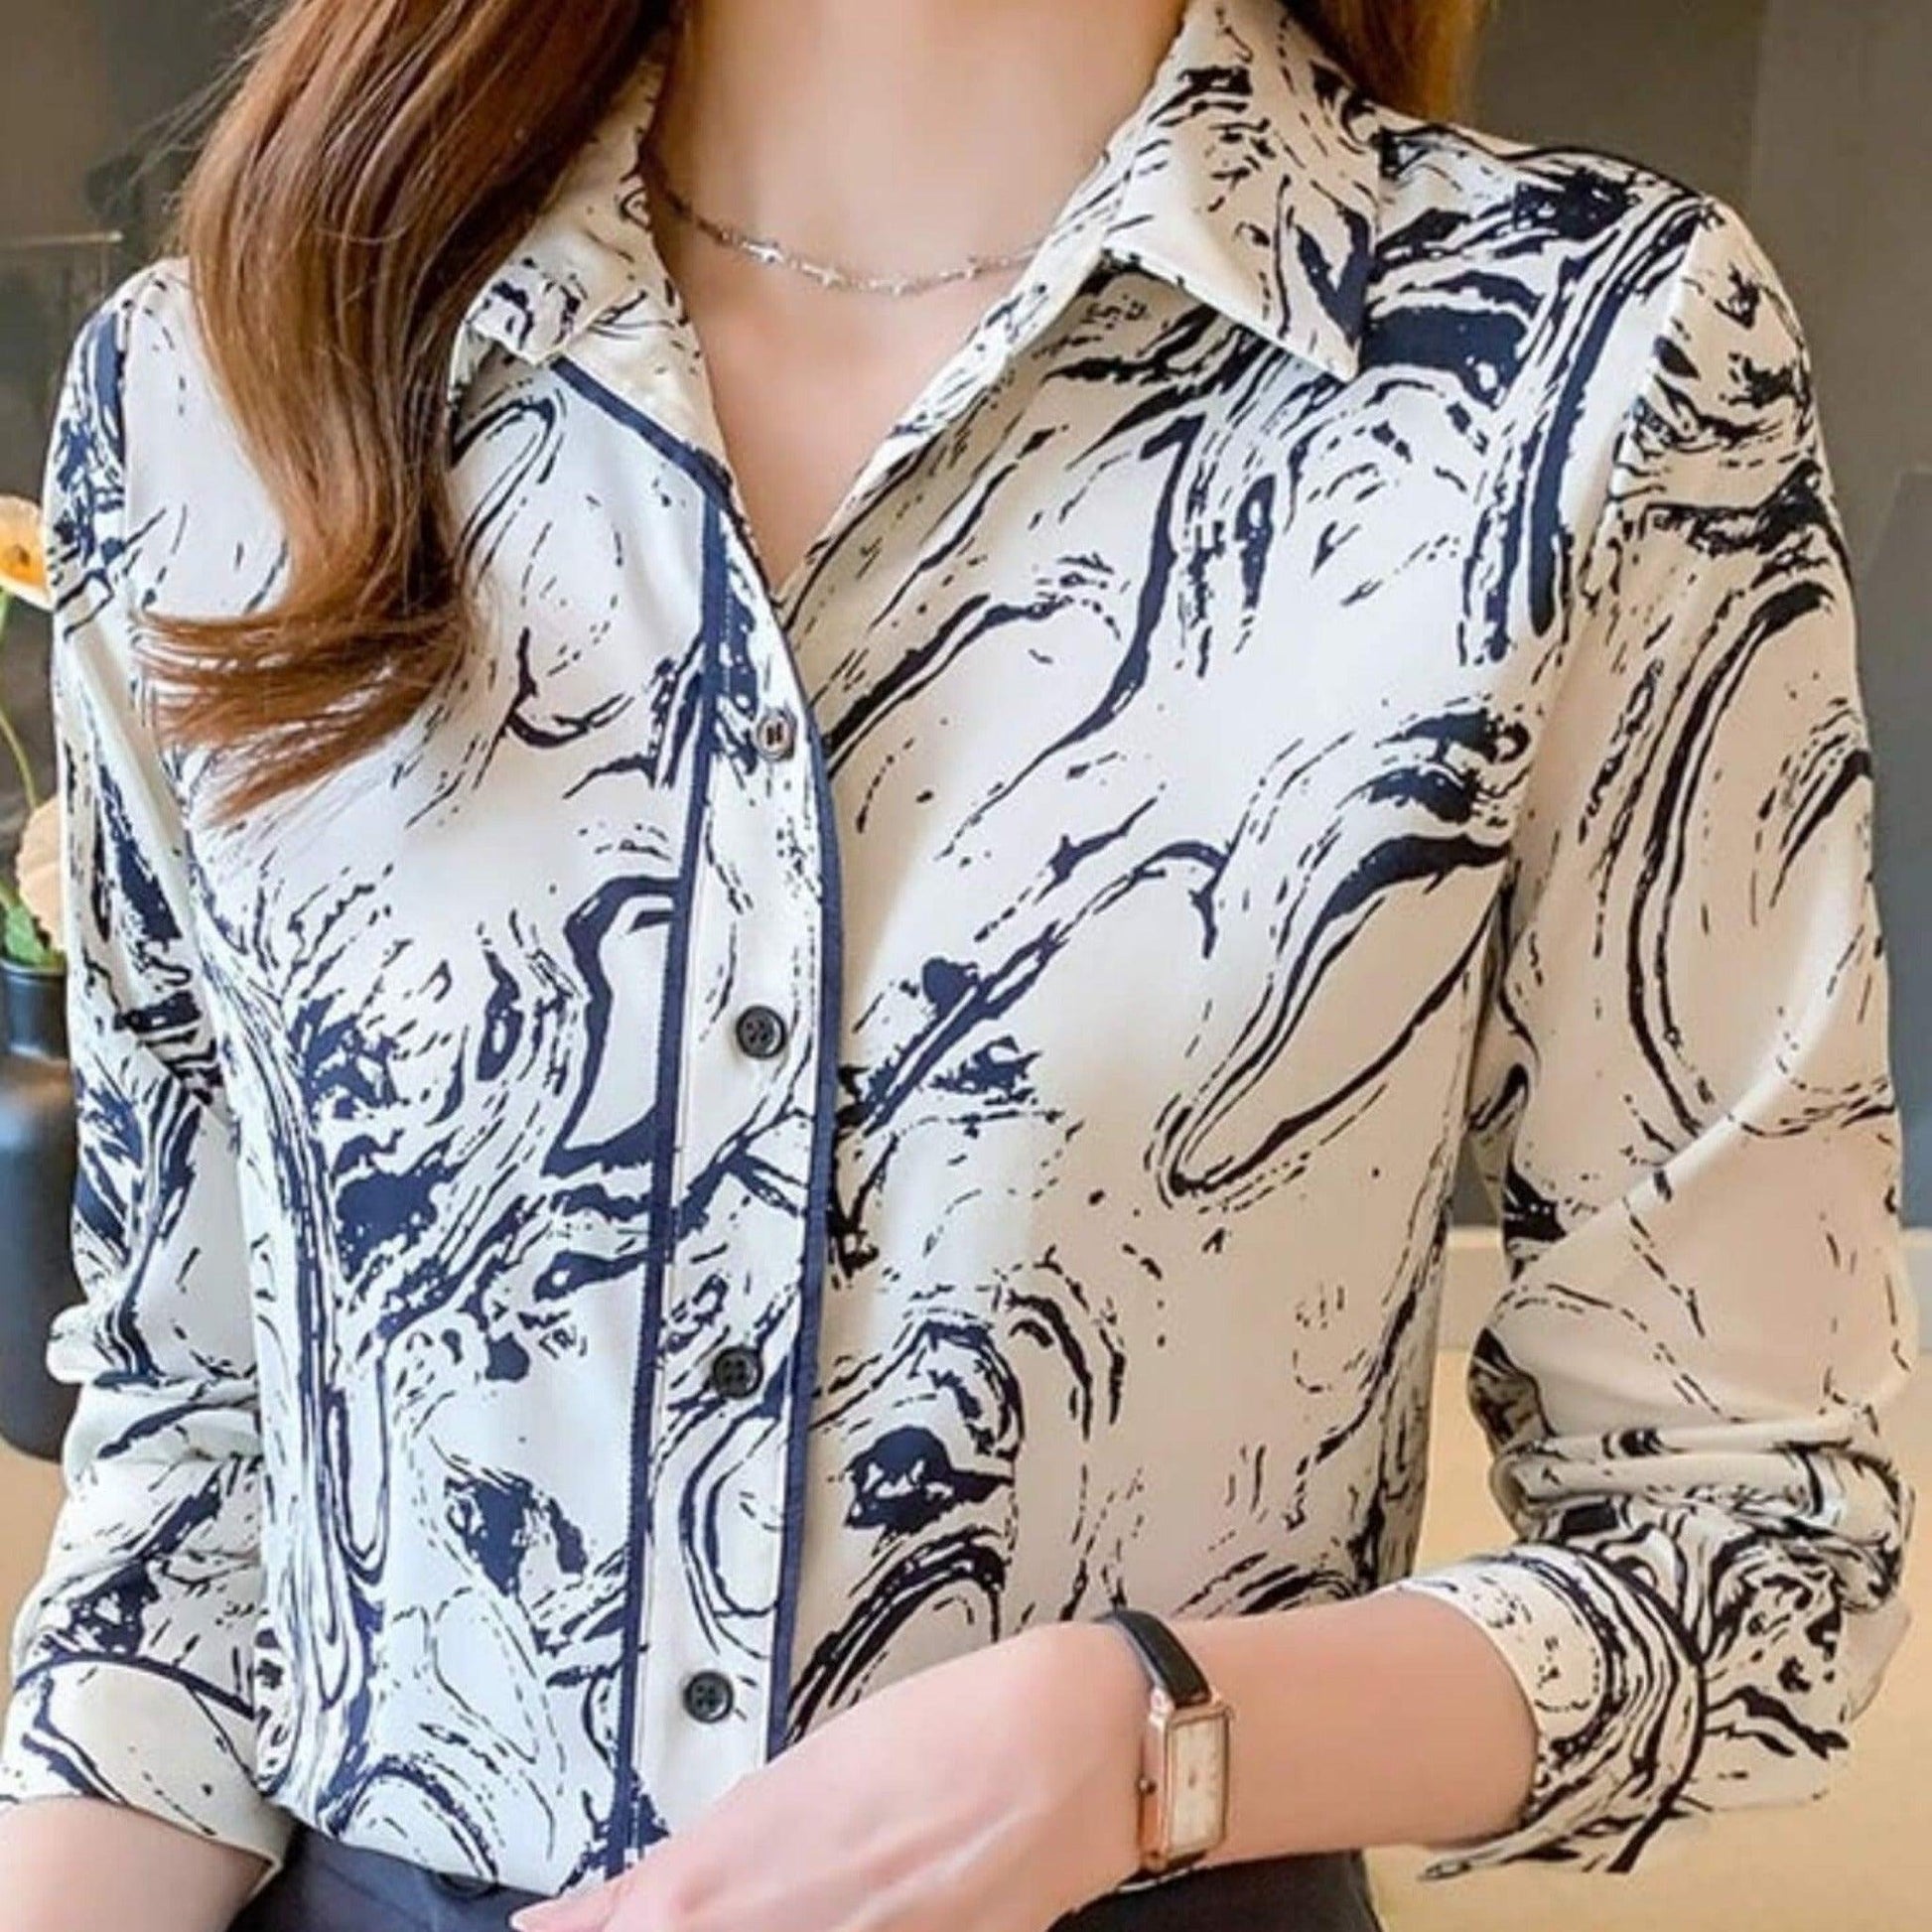 Printed Shirt Try Modest